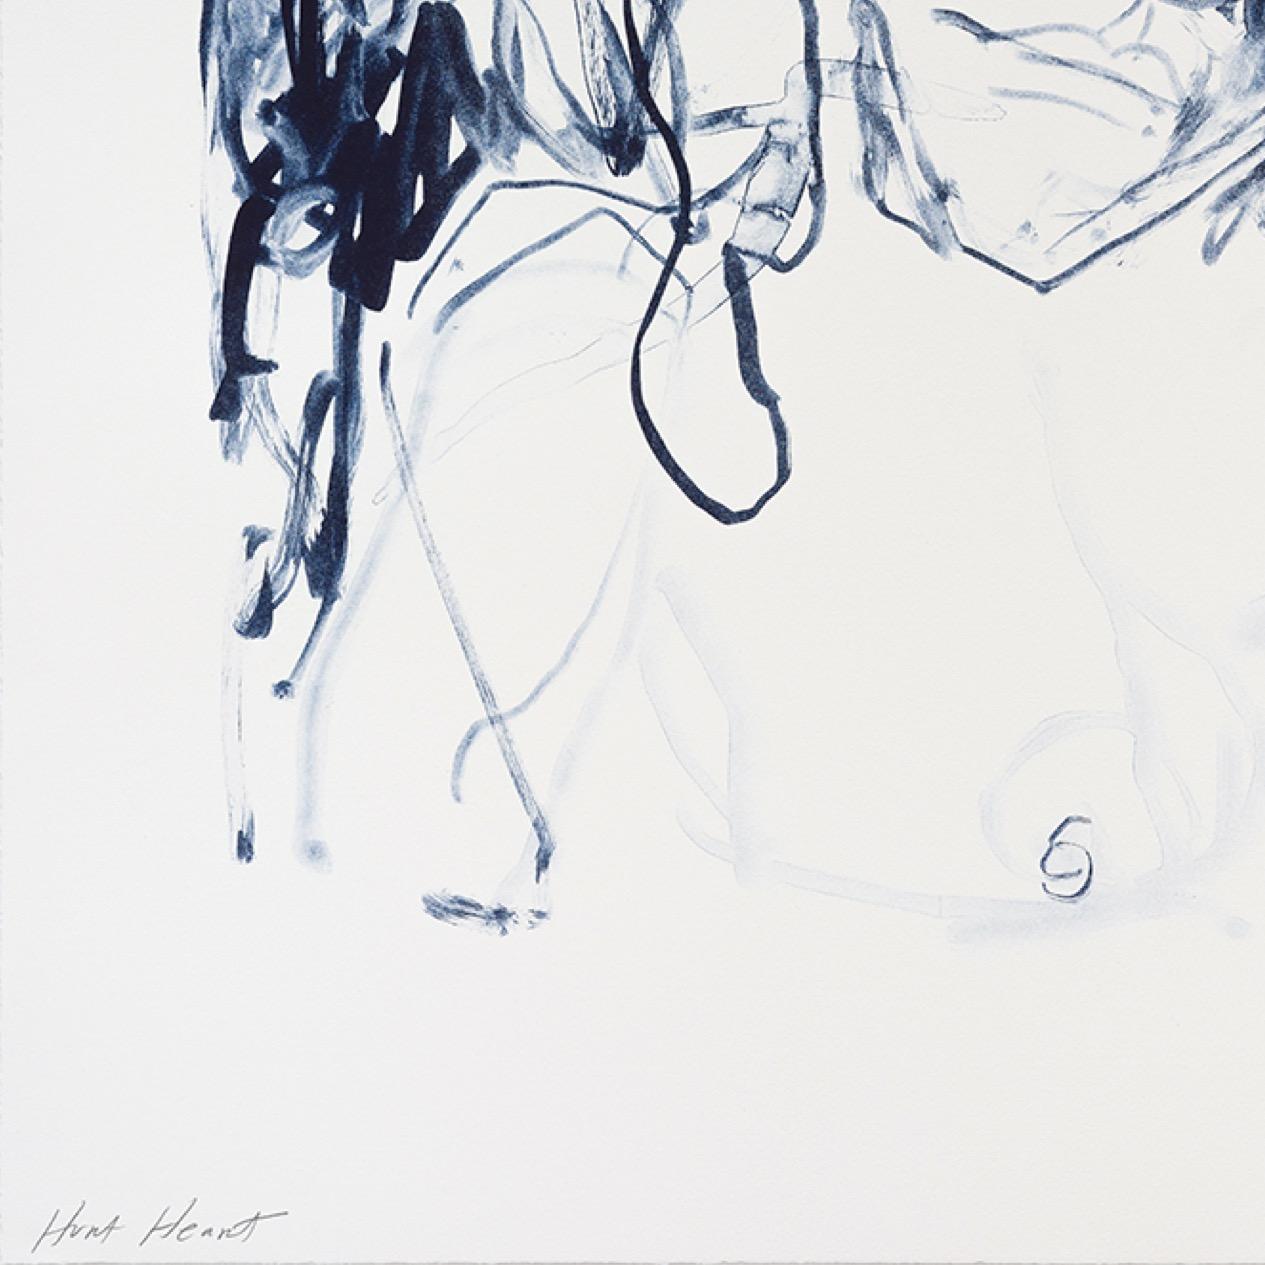 Hurt Heart (from A Journey to Death) - Emin, Contemporary, YBAs, Lithograph - Young British Artists (YBA) Print by Tracey Emin